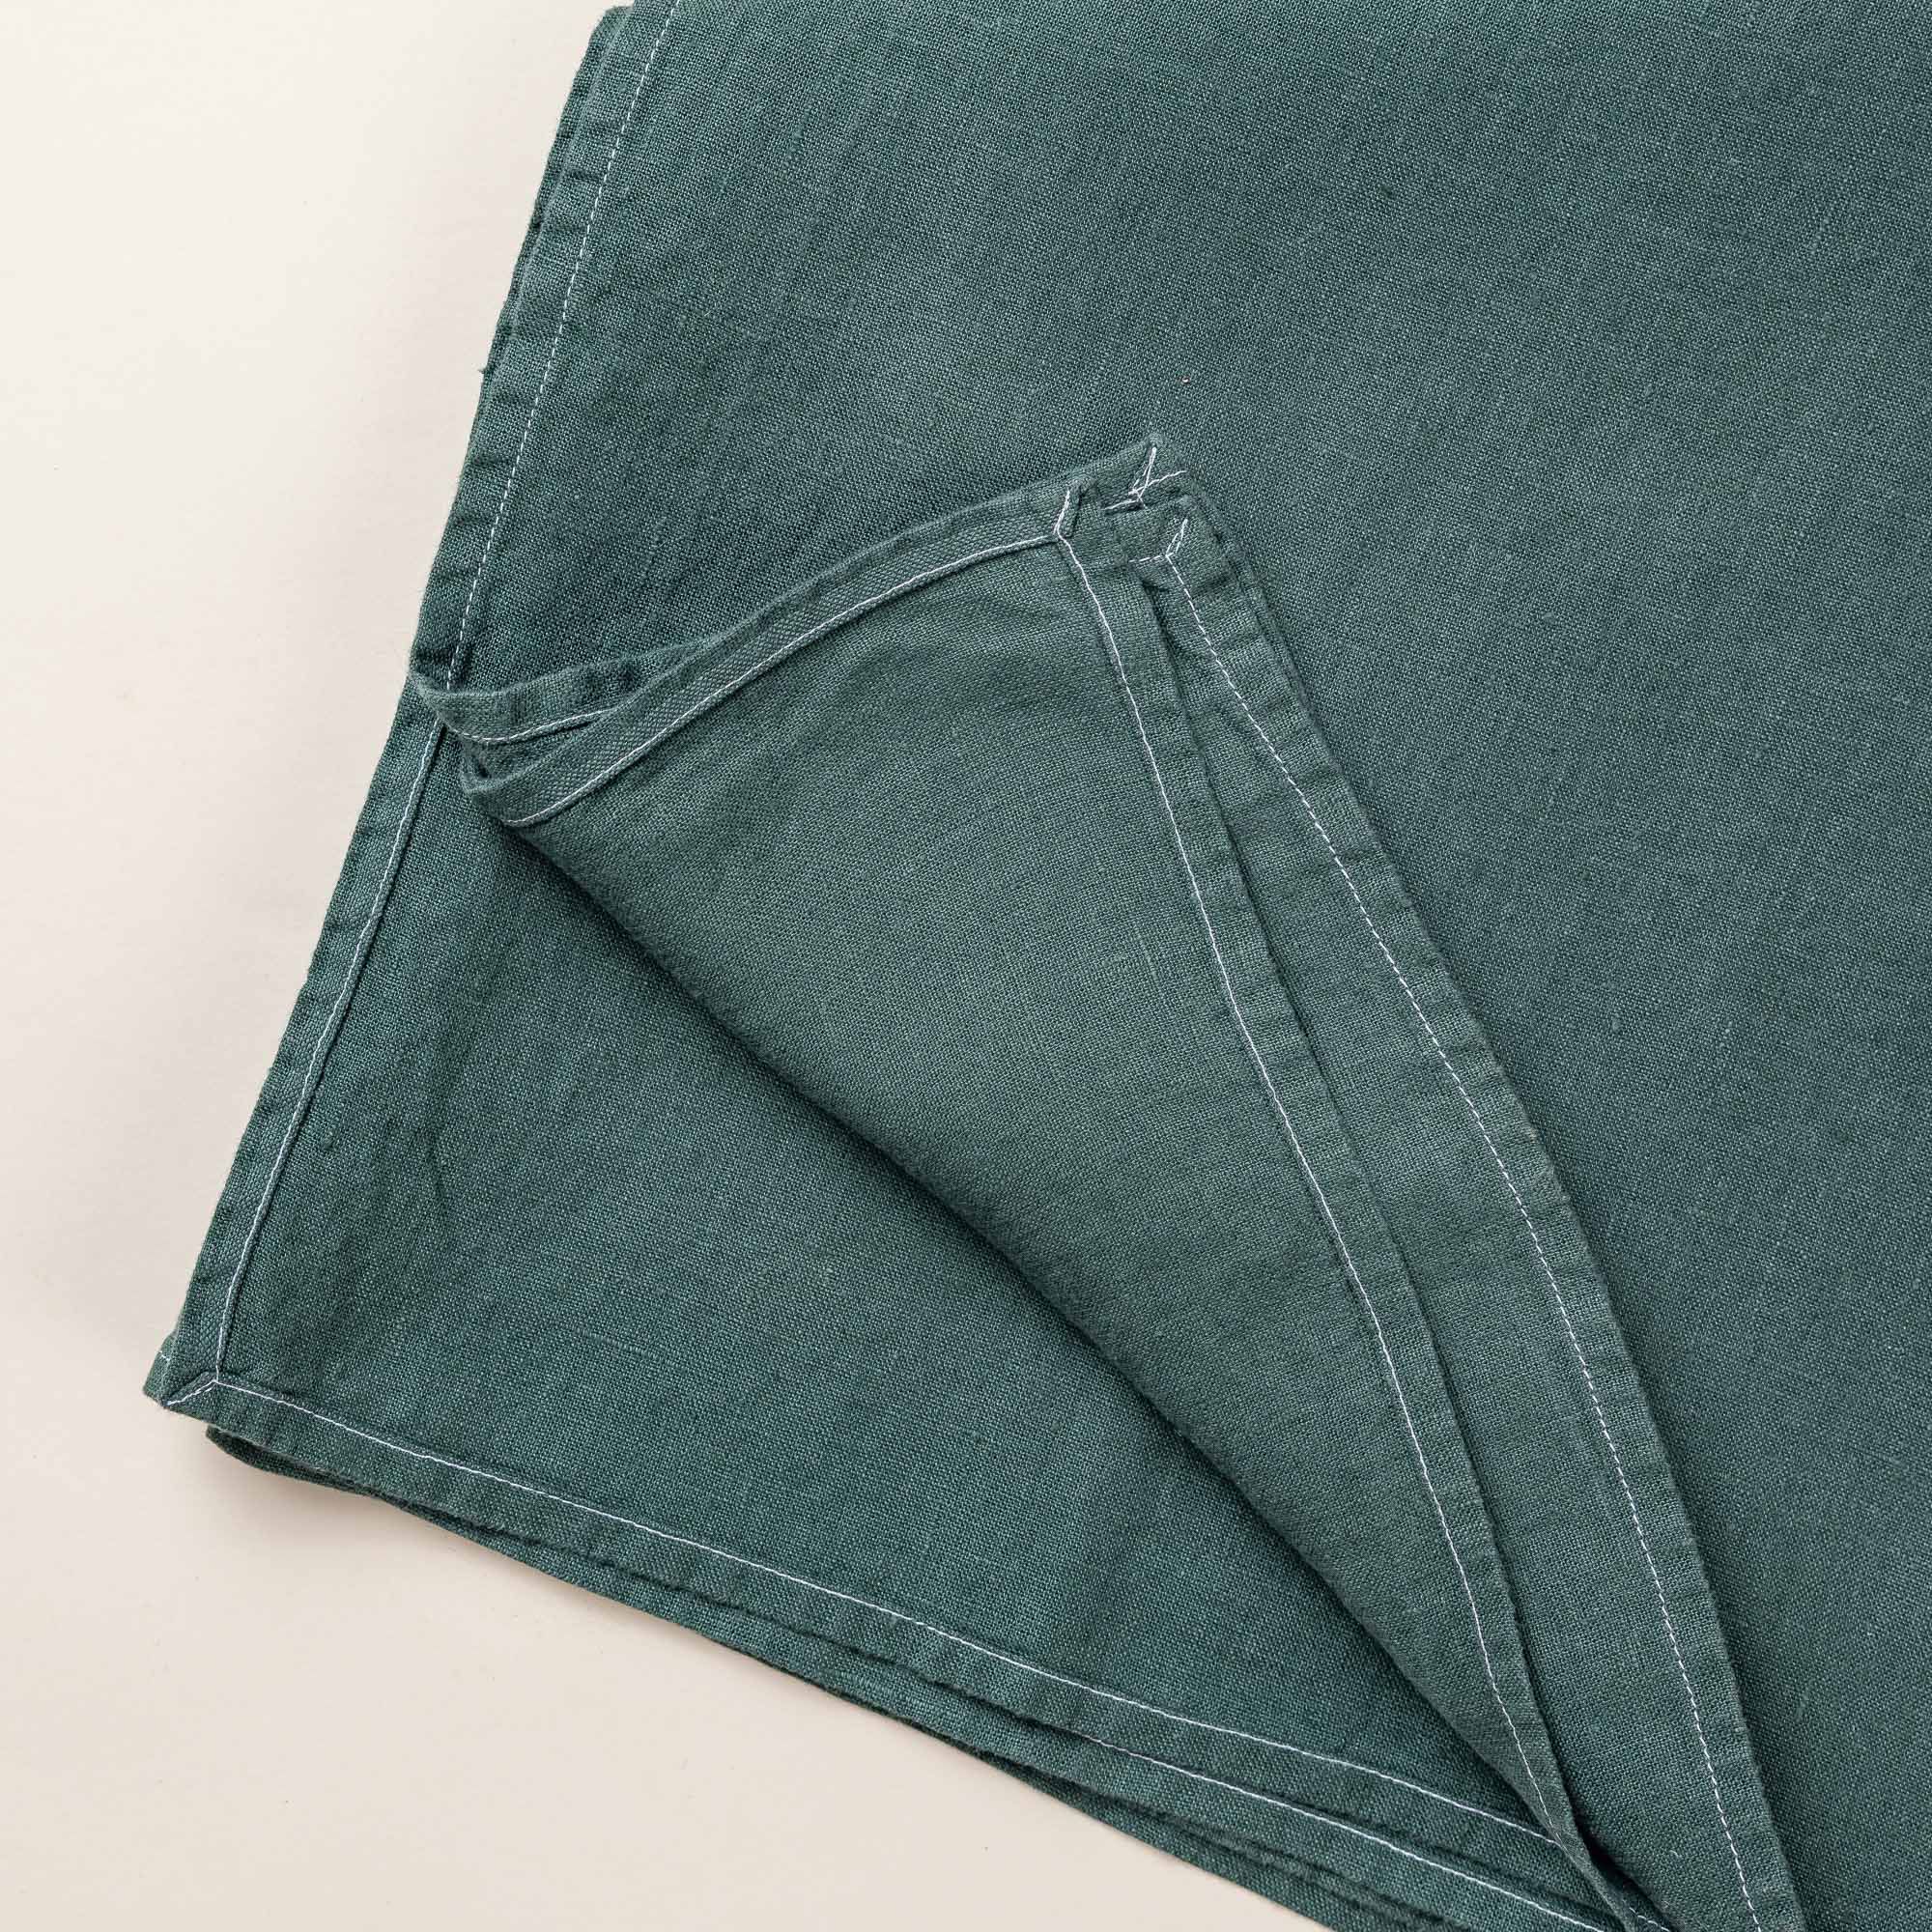 A closeup of the corner edge of a folded linen tablecloth in a solid deep teal color